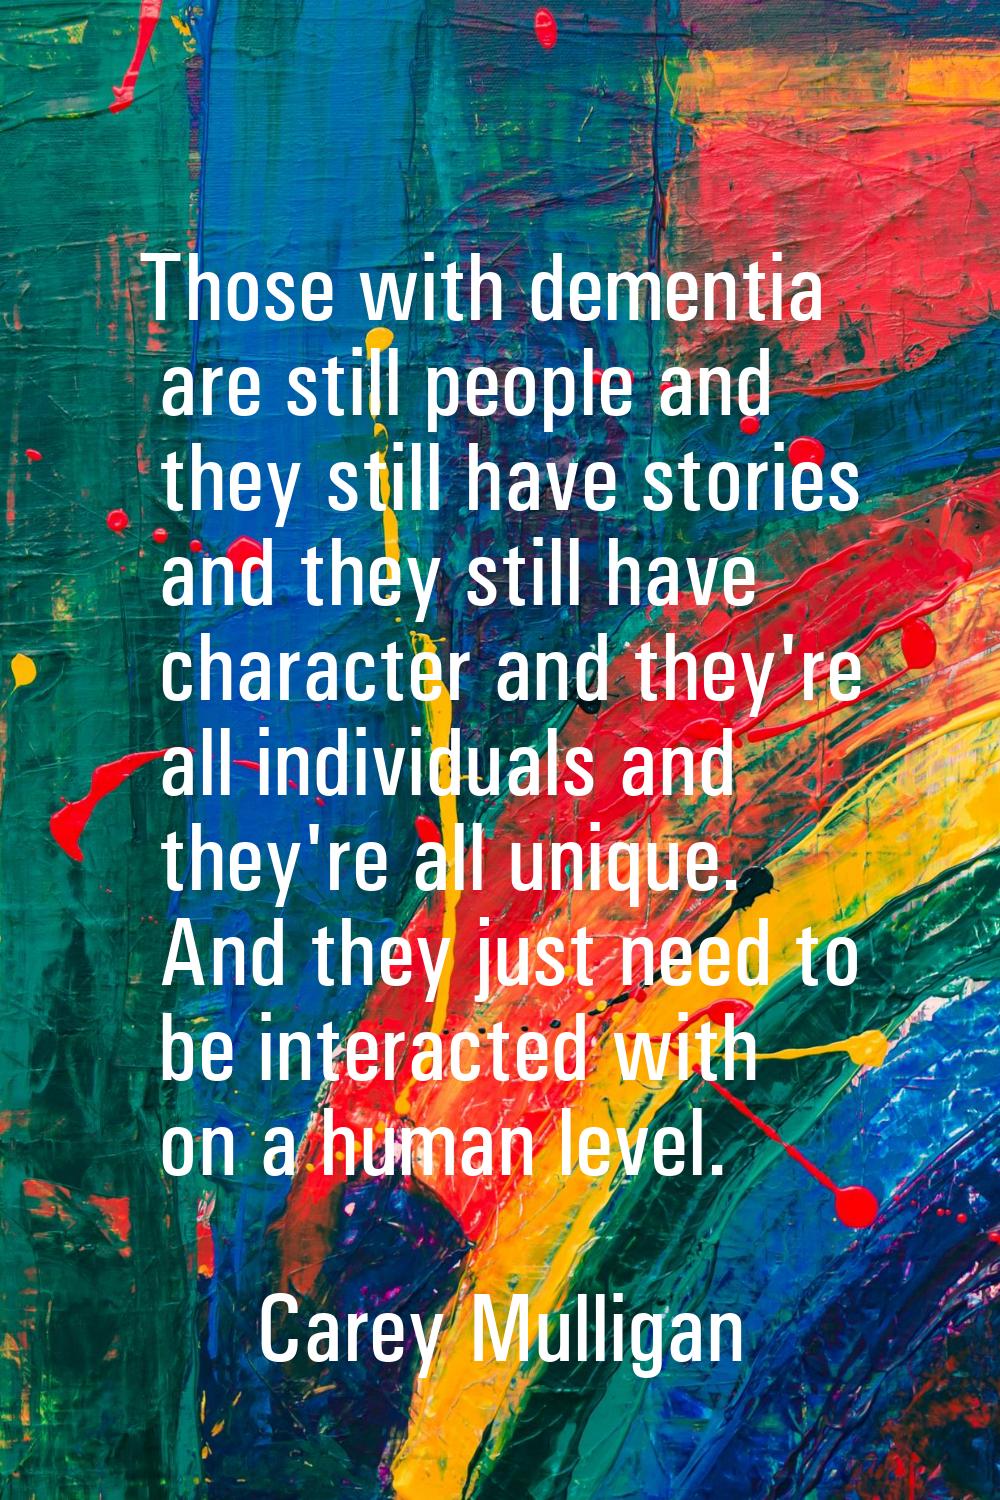 Those with dementia are still people and they still have stories and they still have character and 